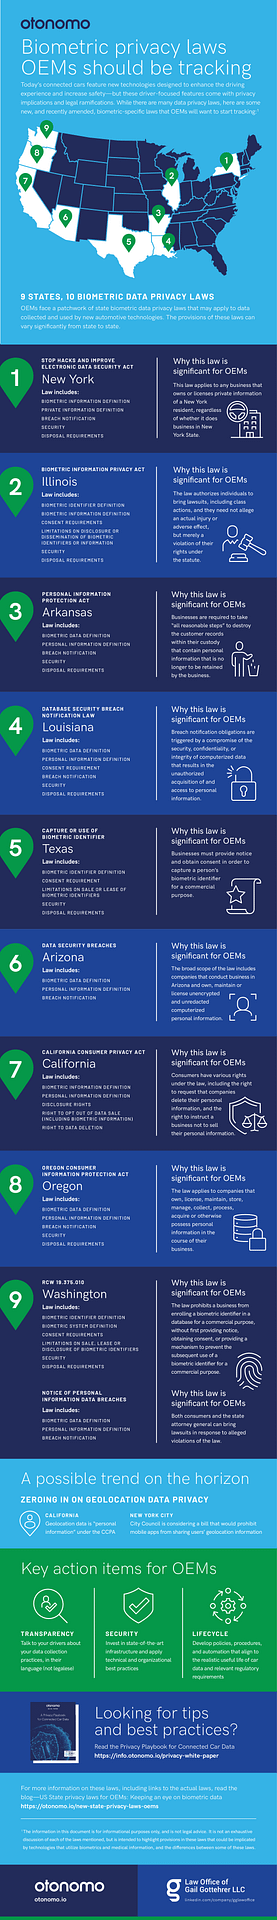 Infographic: US State Privacy Law Trends